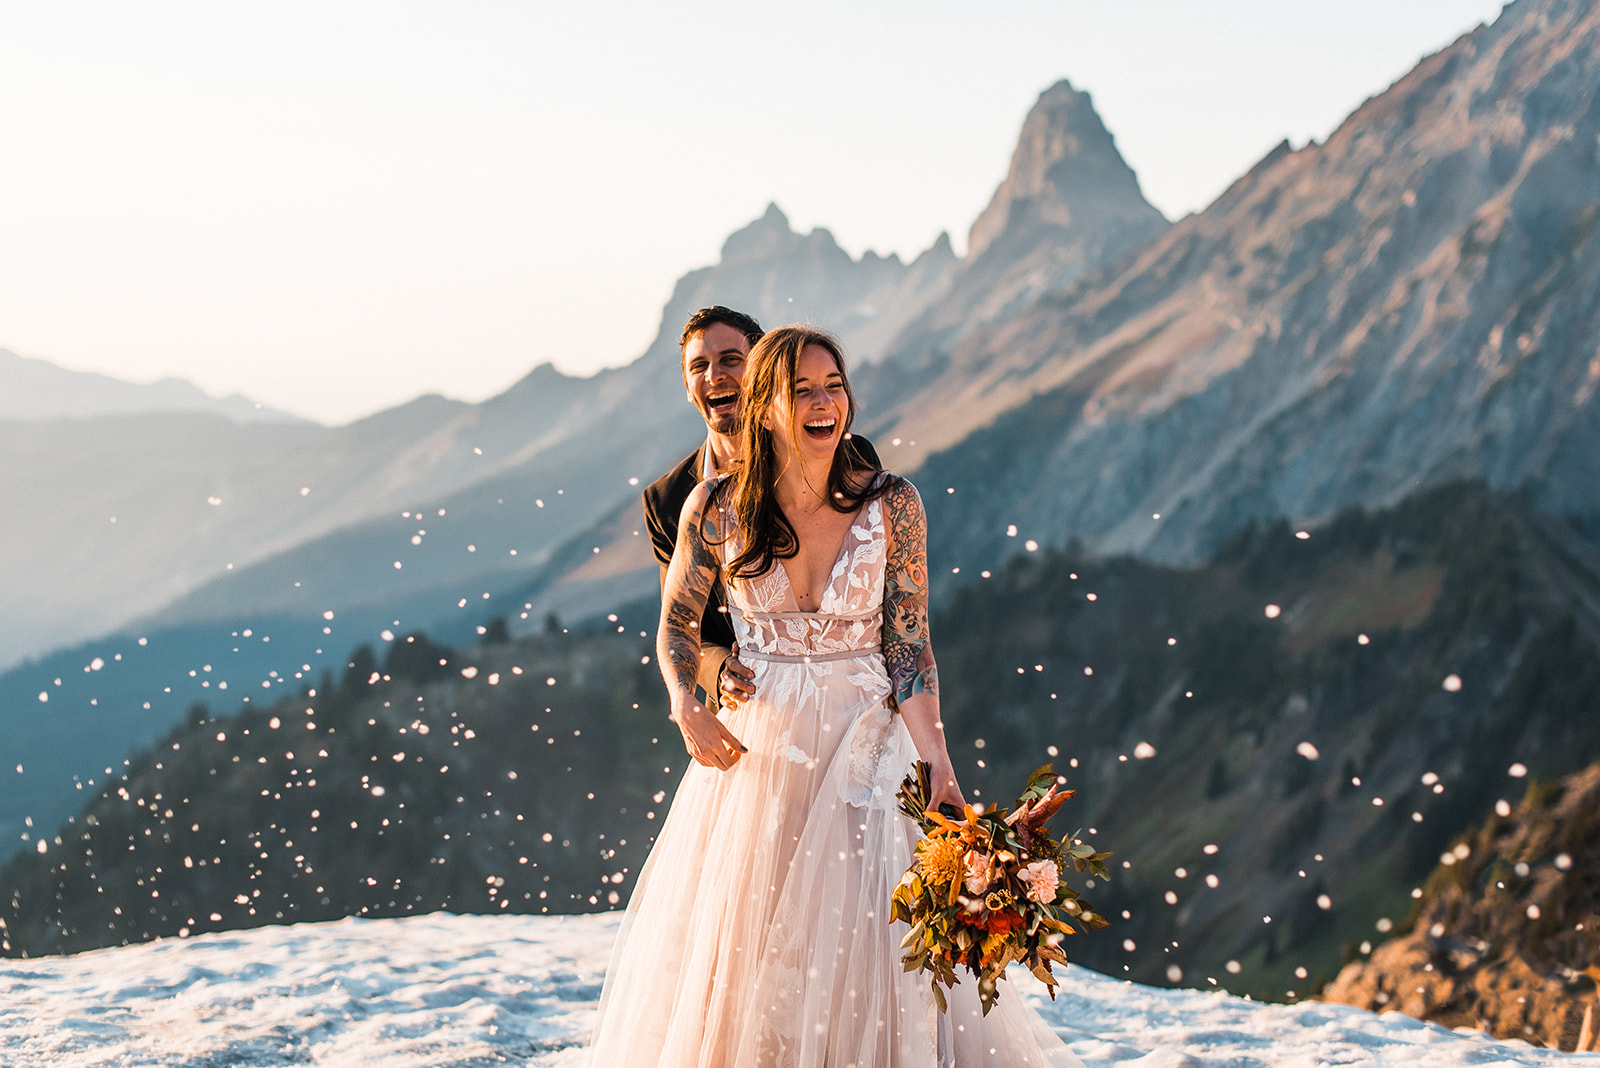 Thea_Lucas_North_Cascades_Elopement_The_Foxes_Photography_152-2.jpg